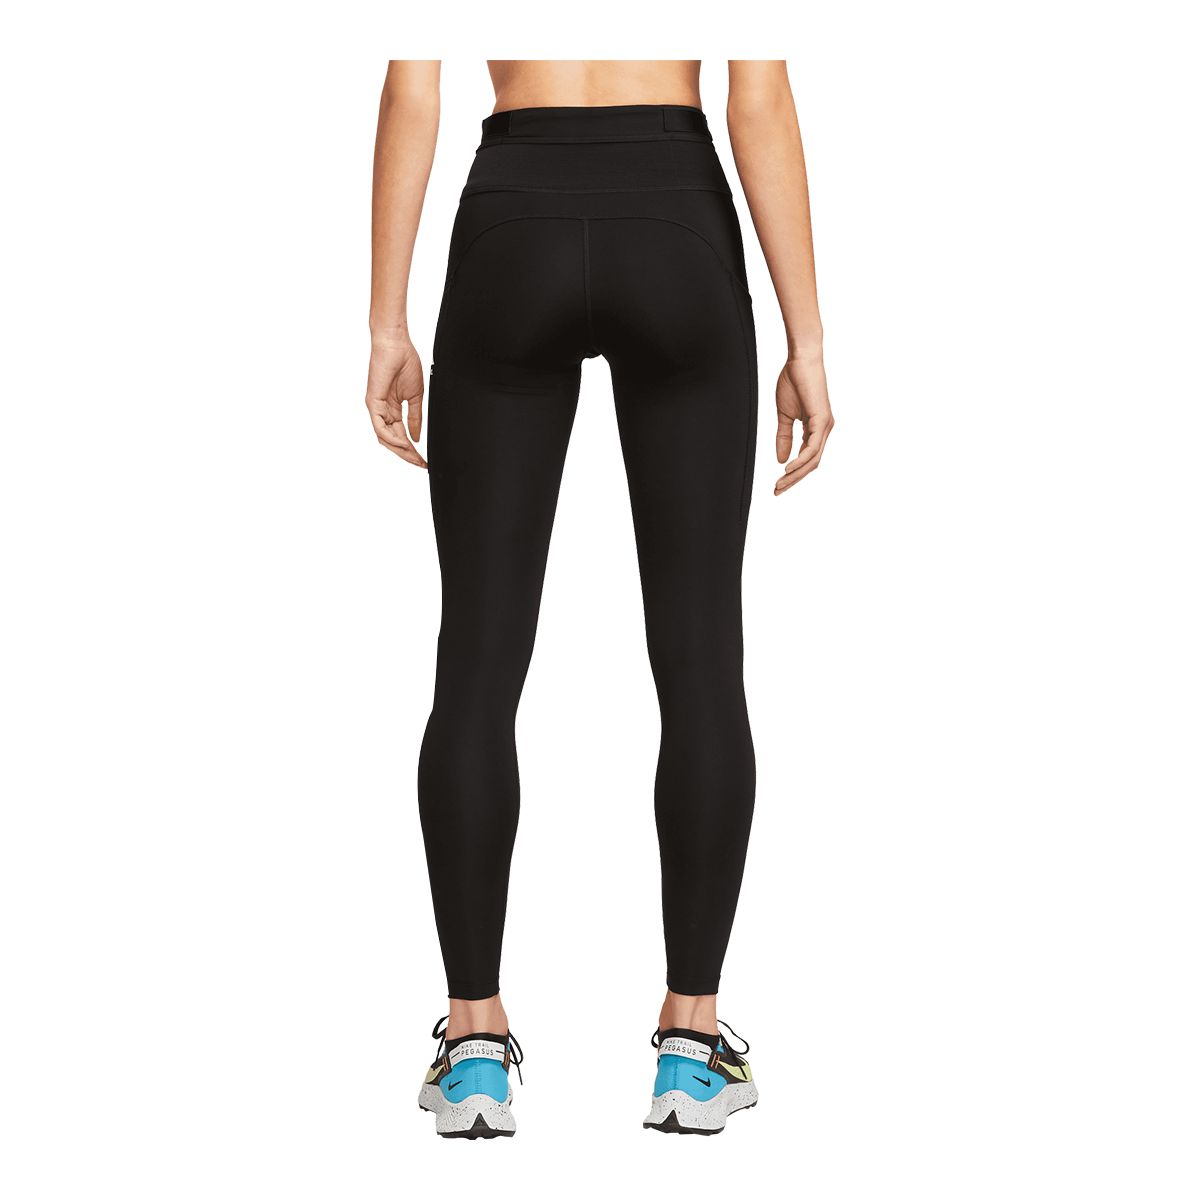 Nike Epic Luxe Textured Running Tights, Leggings (CU3379-638)